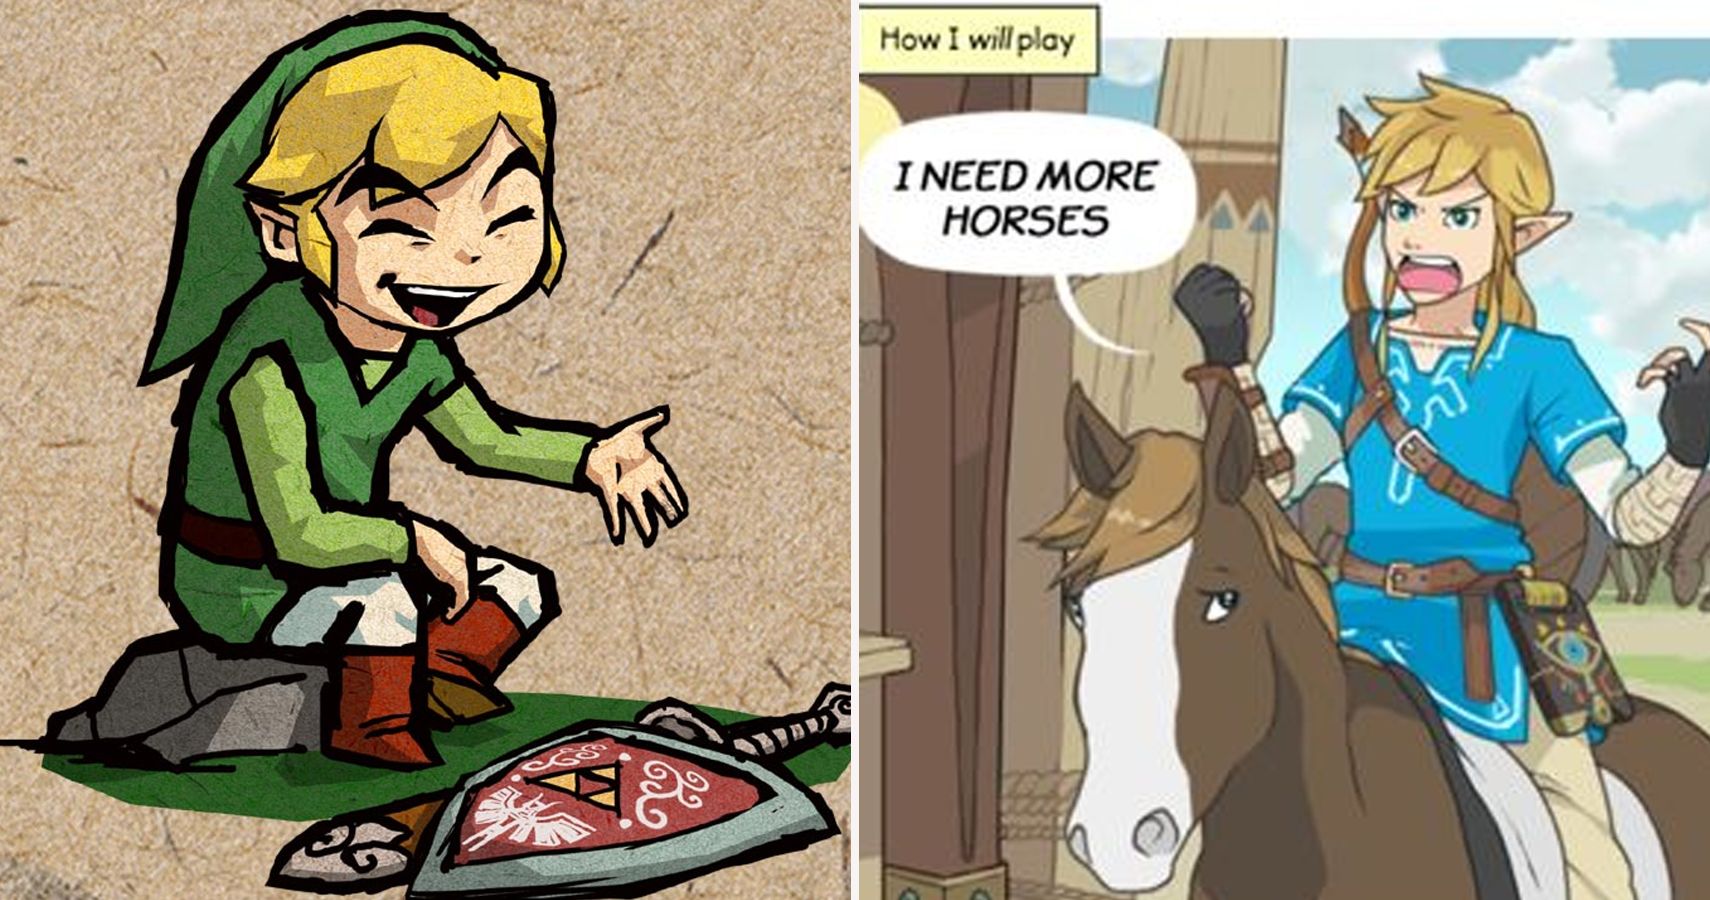 25 Hilarious The Legend Of Zelda Comics That Will Make Any Gamer Say “same”